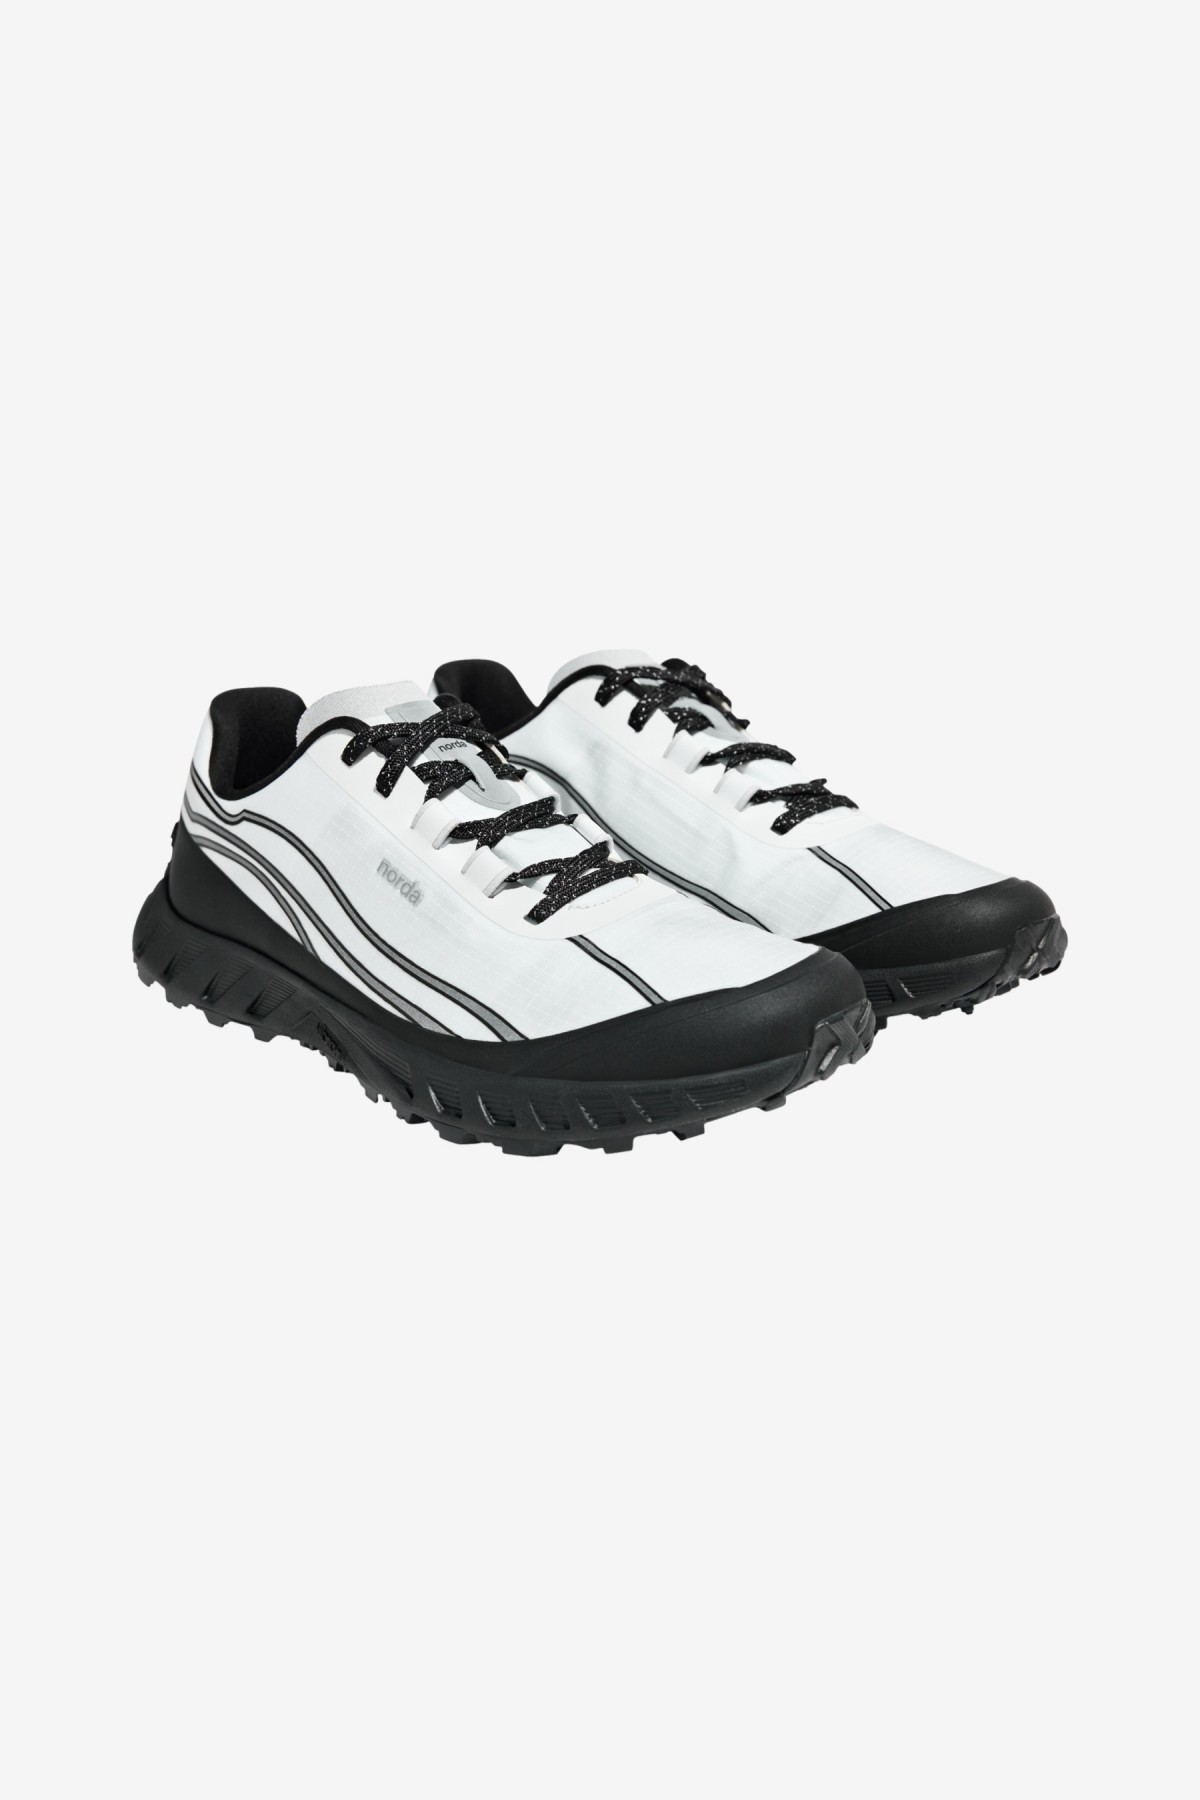 Norda 002 Trail Shoes in White